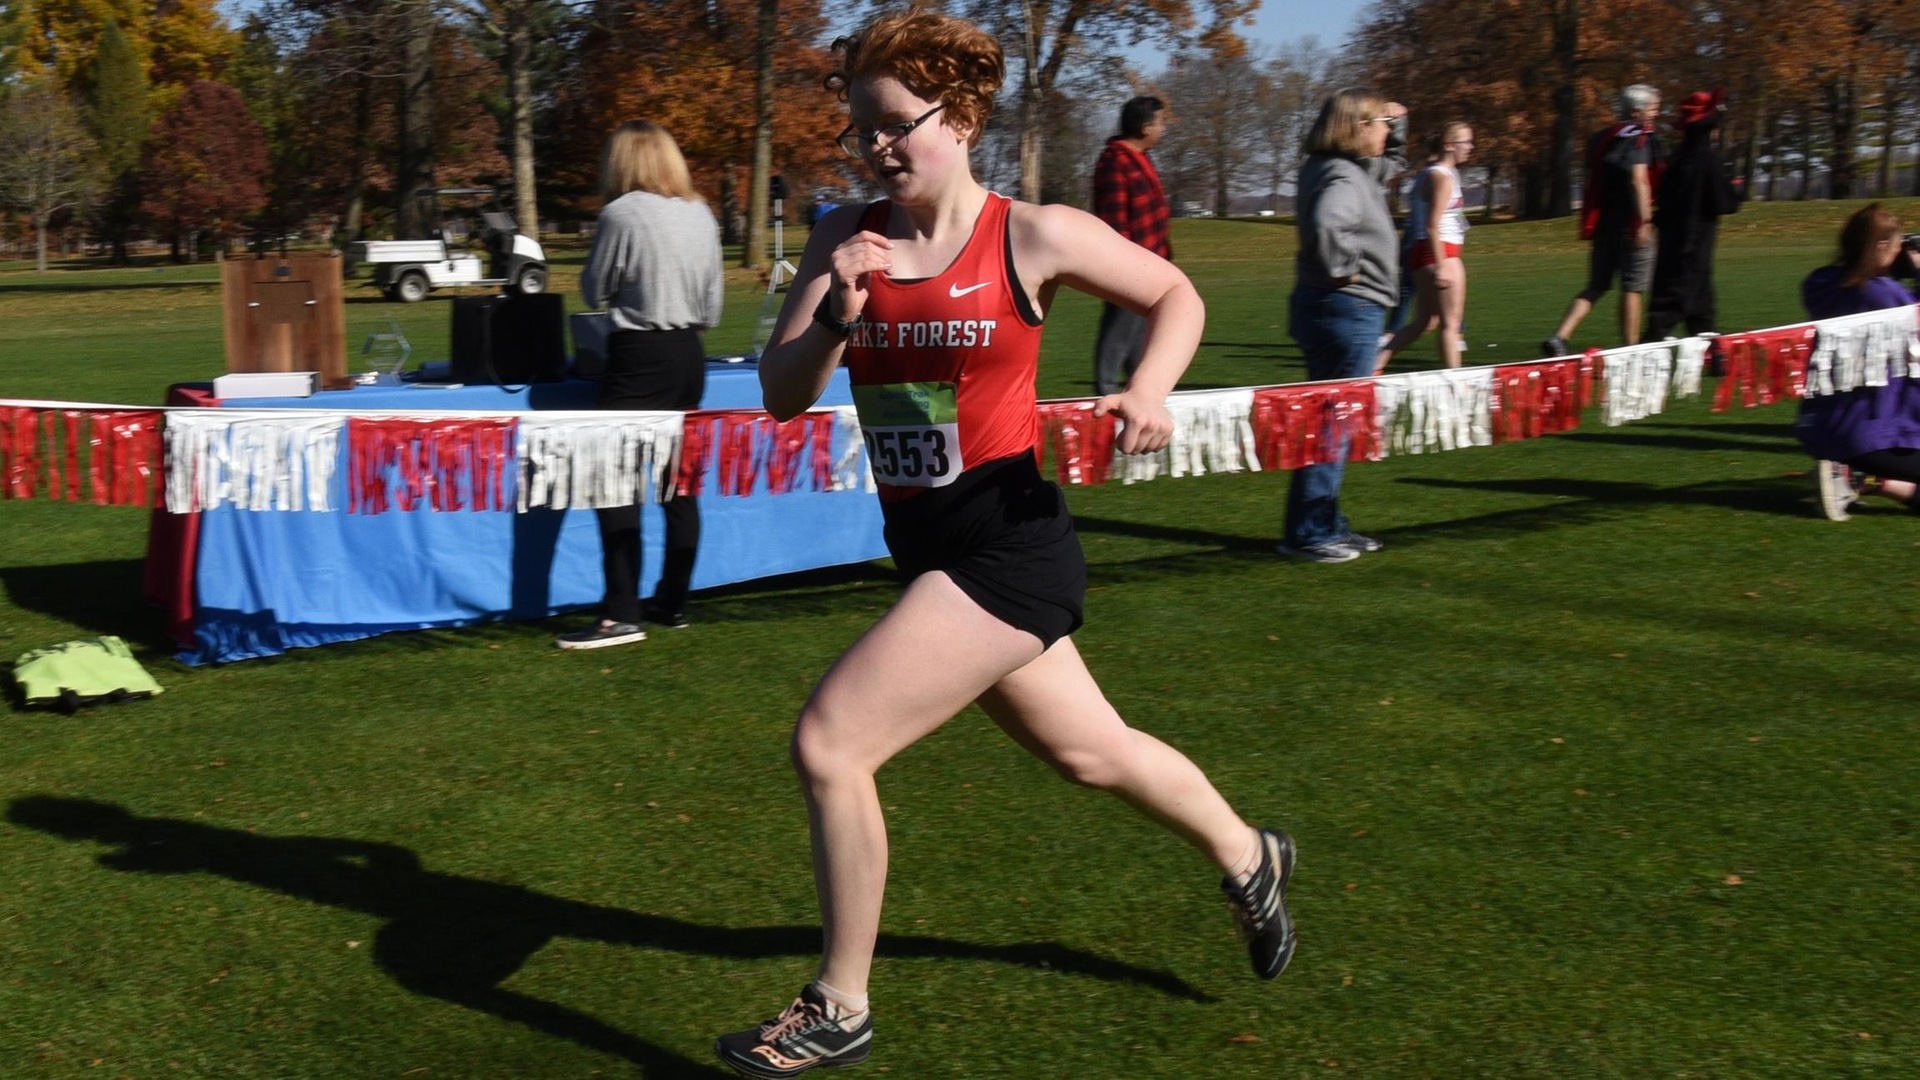 Good Showing for Foresters at MWC Championships